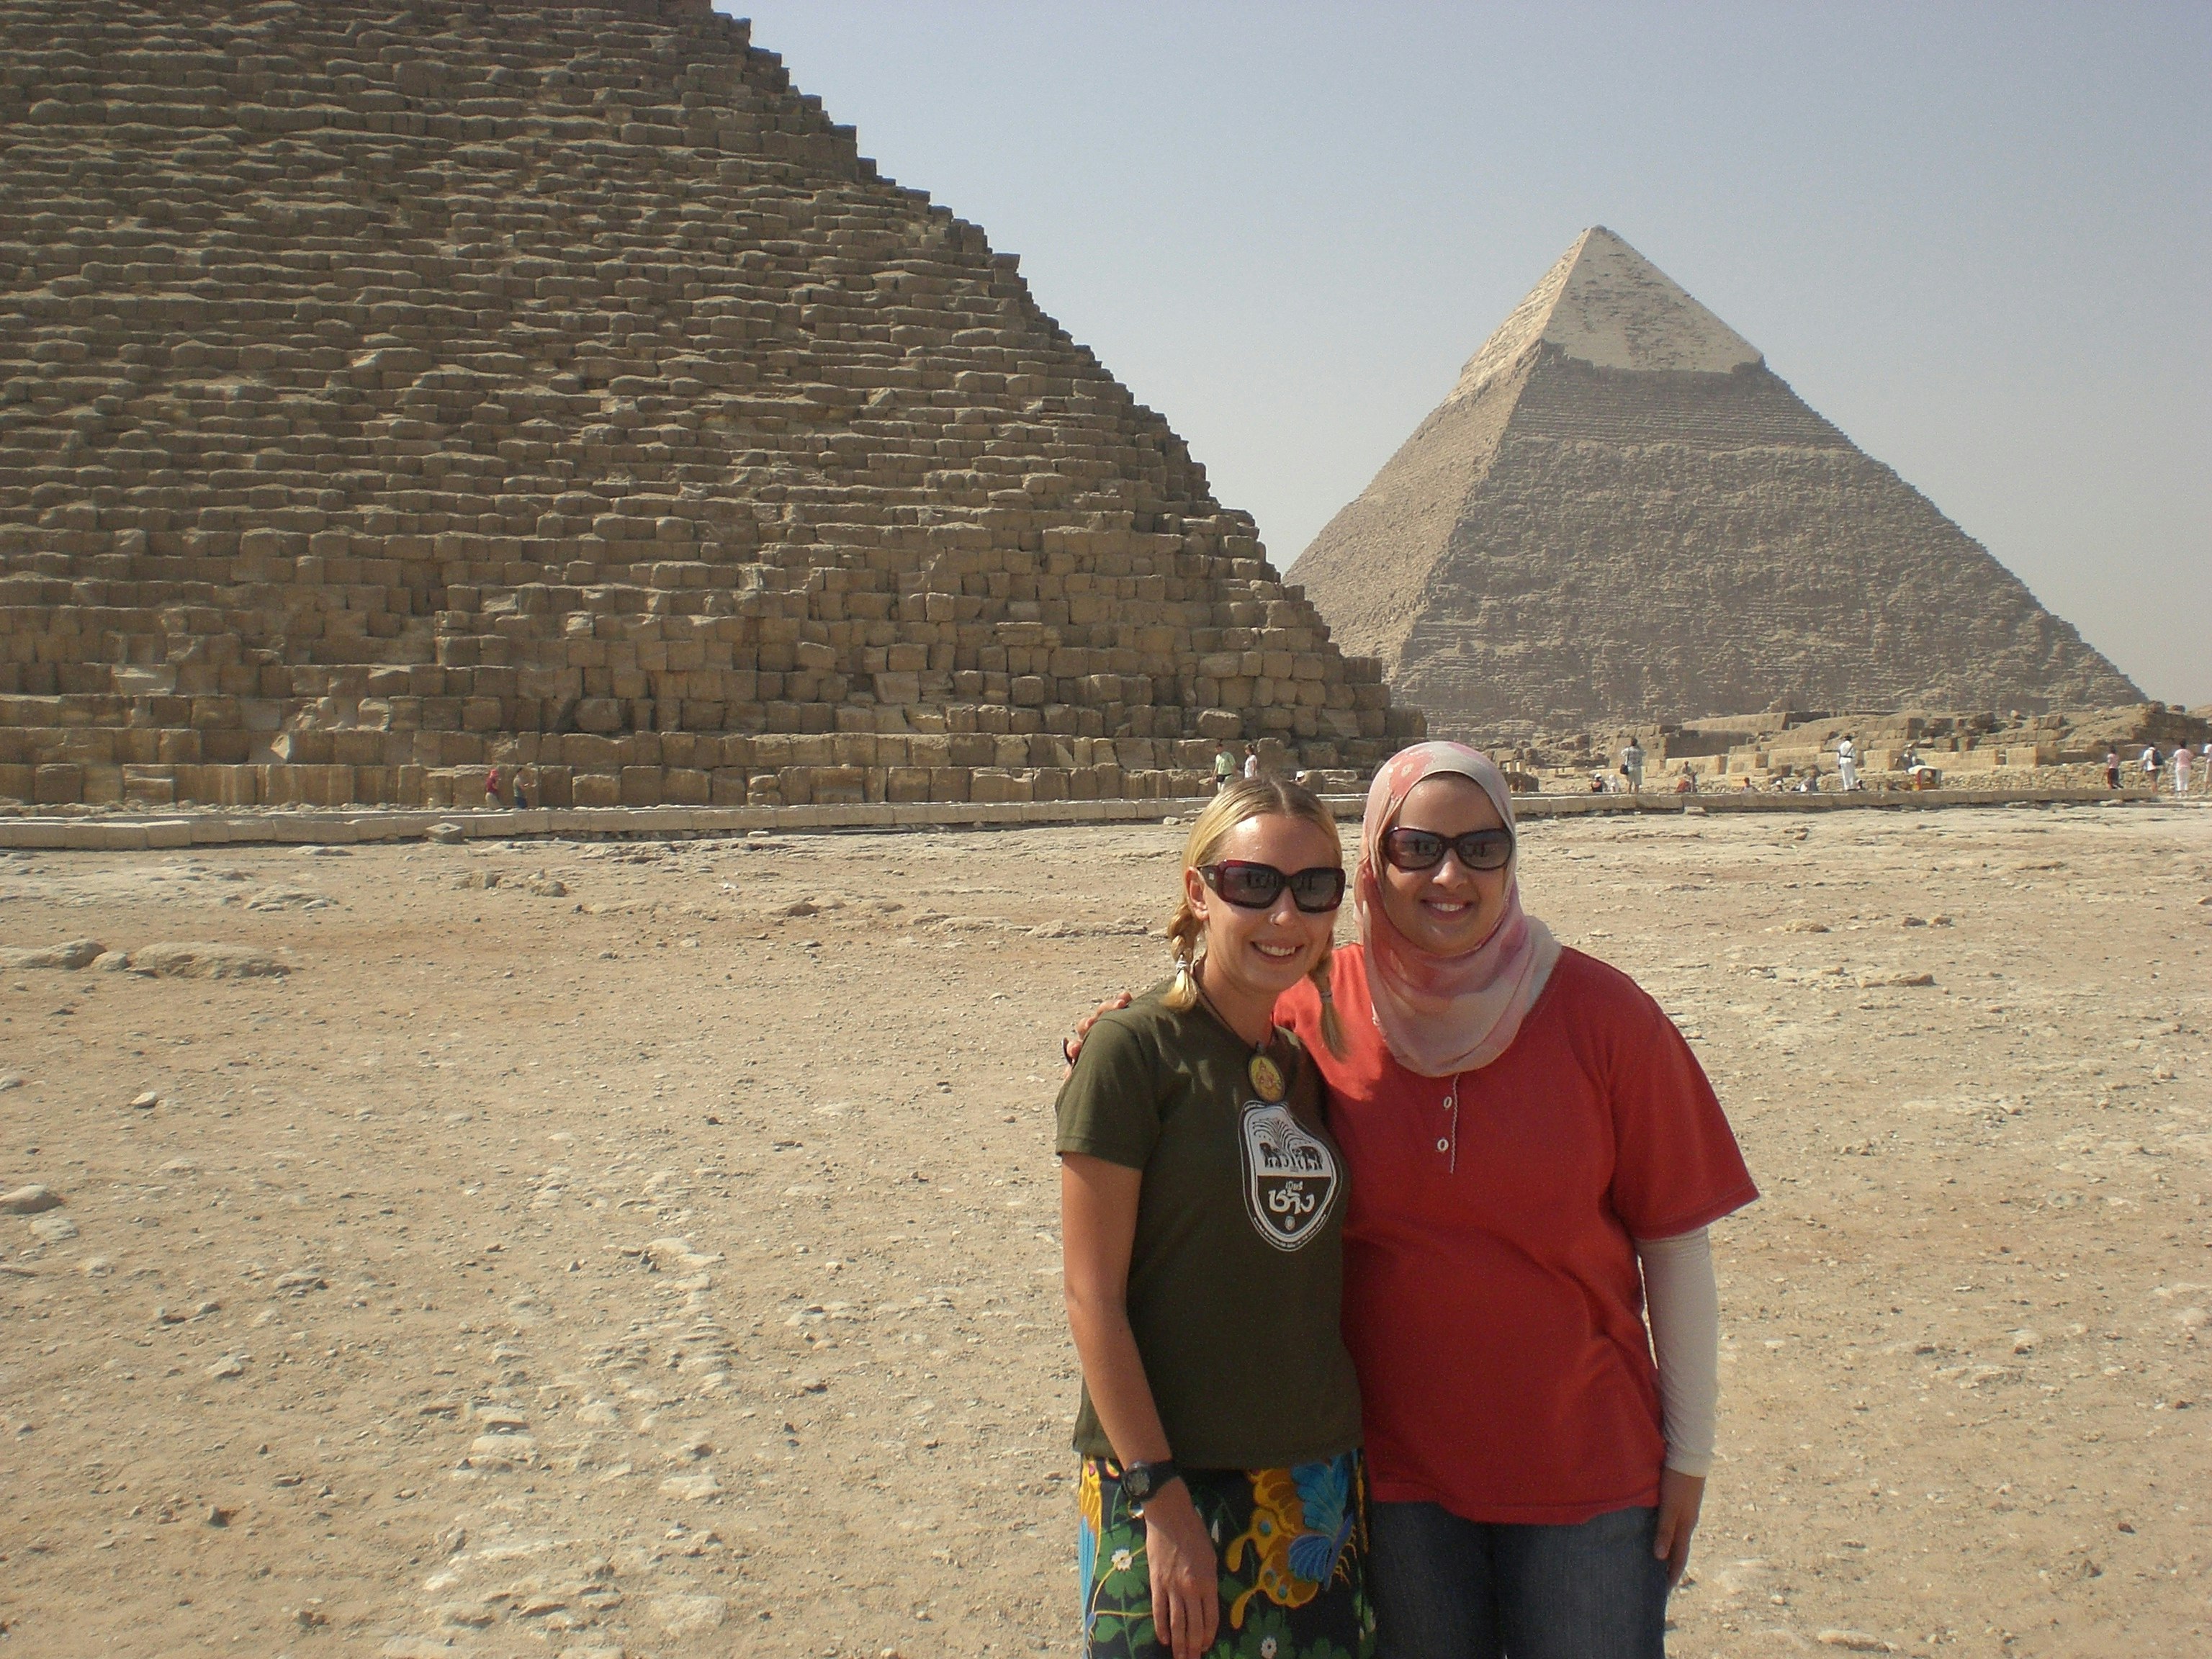 Jess and a headscarf-clad female friend pose in the desert with the sand-coloured Pyramids of Giza rising into the sky behind them.